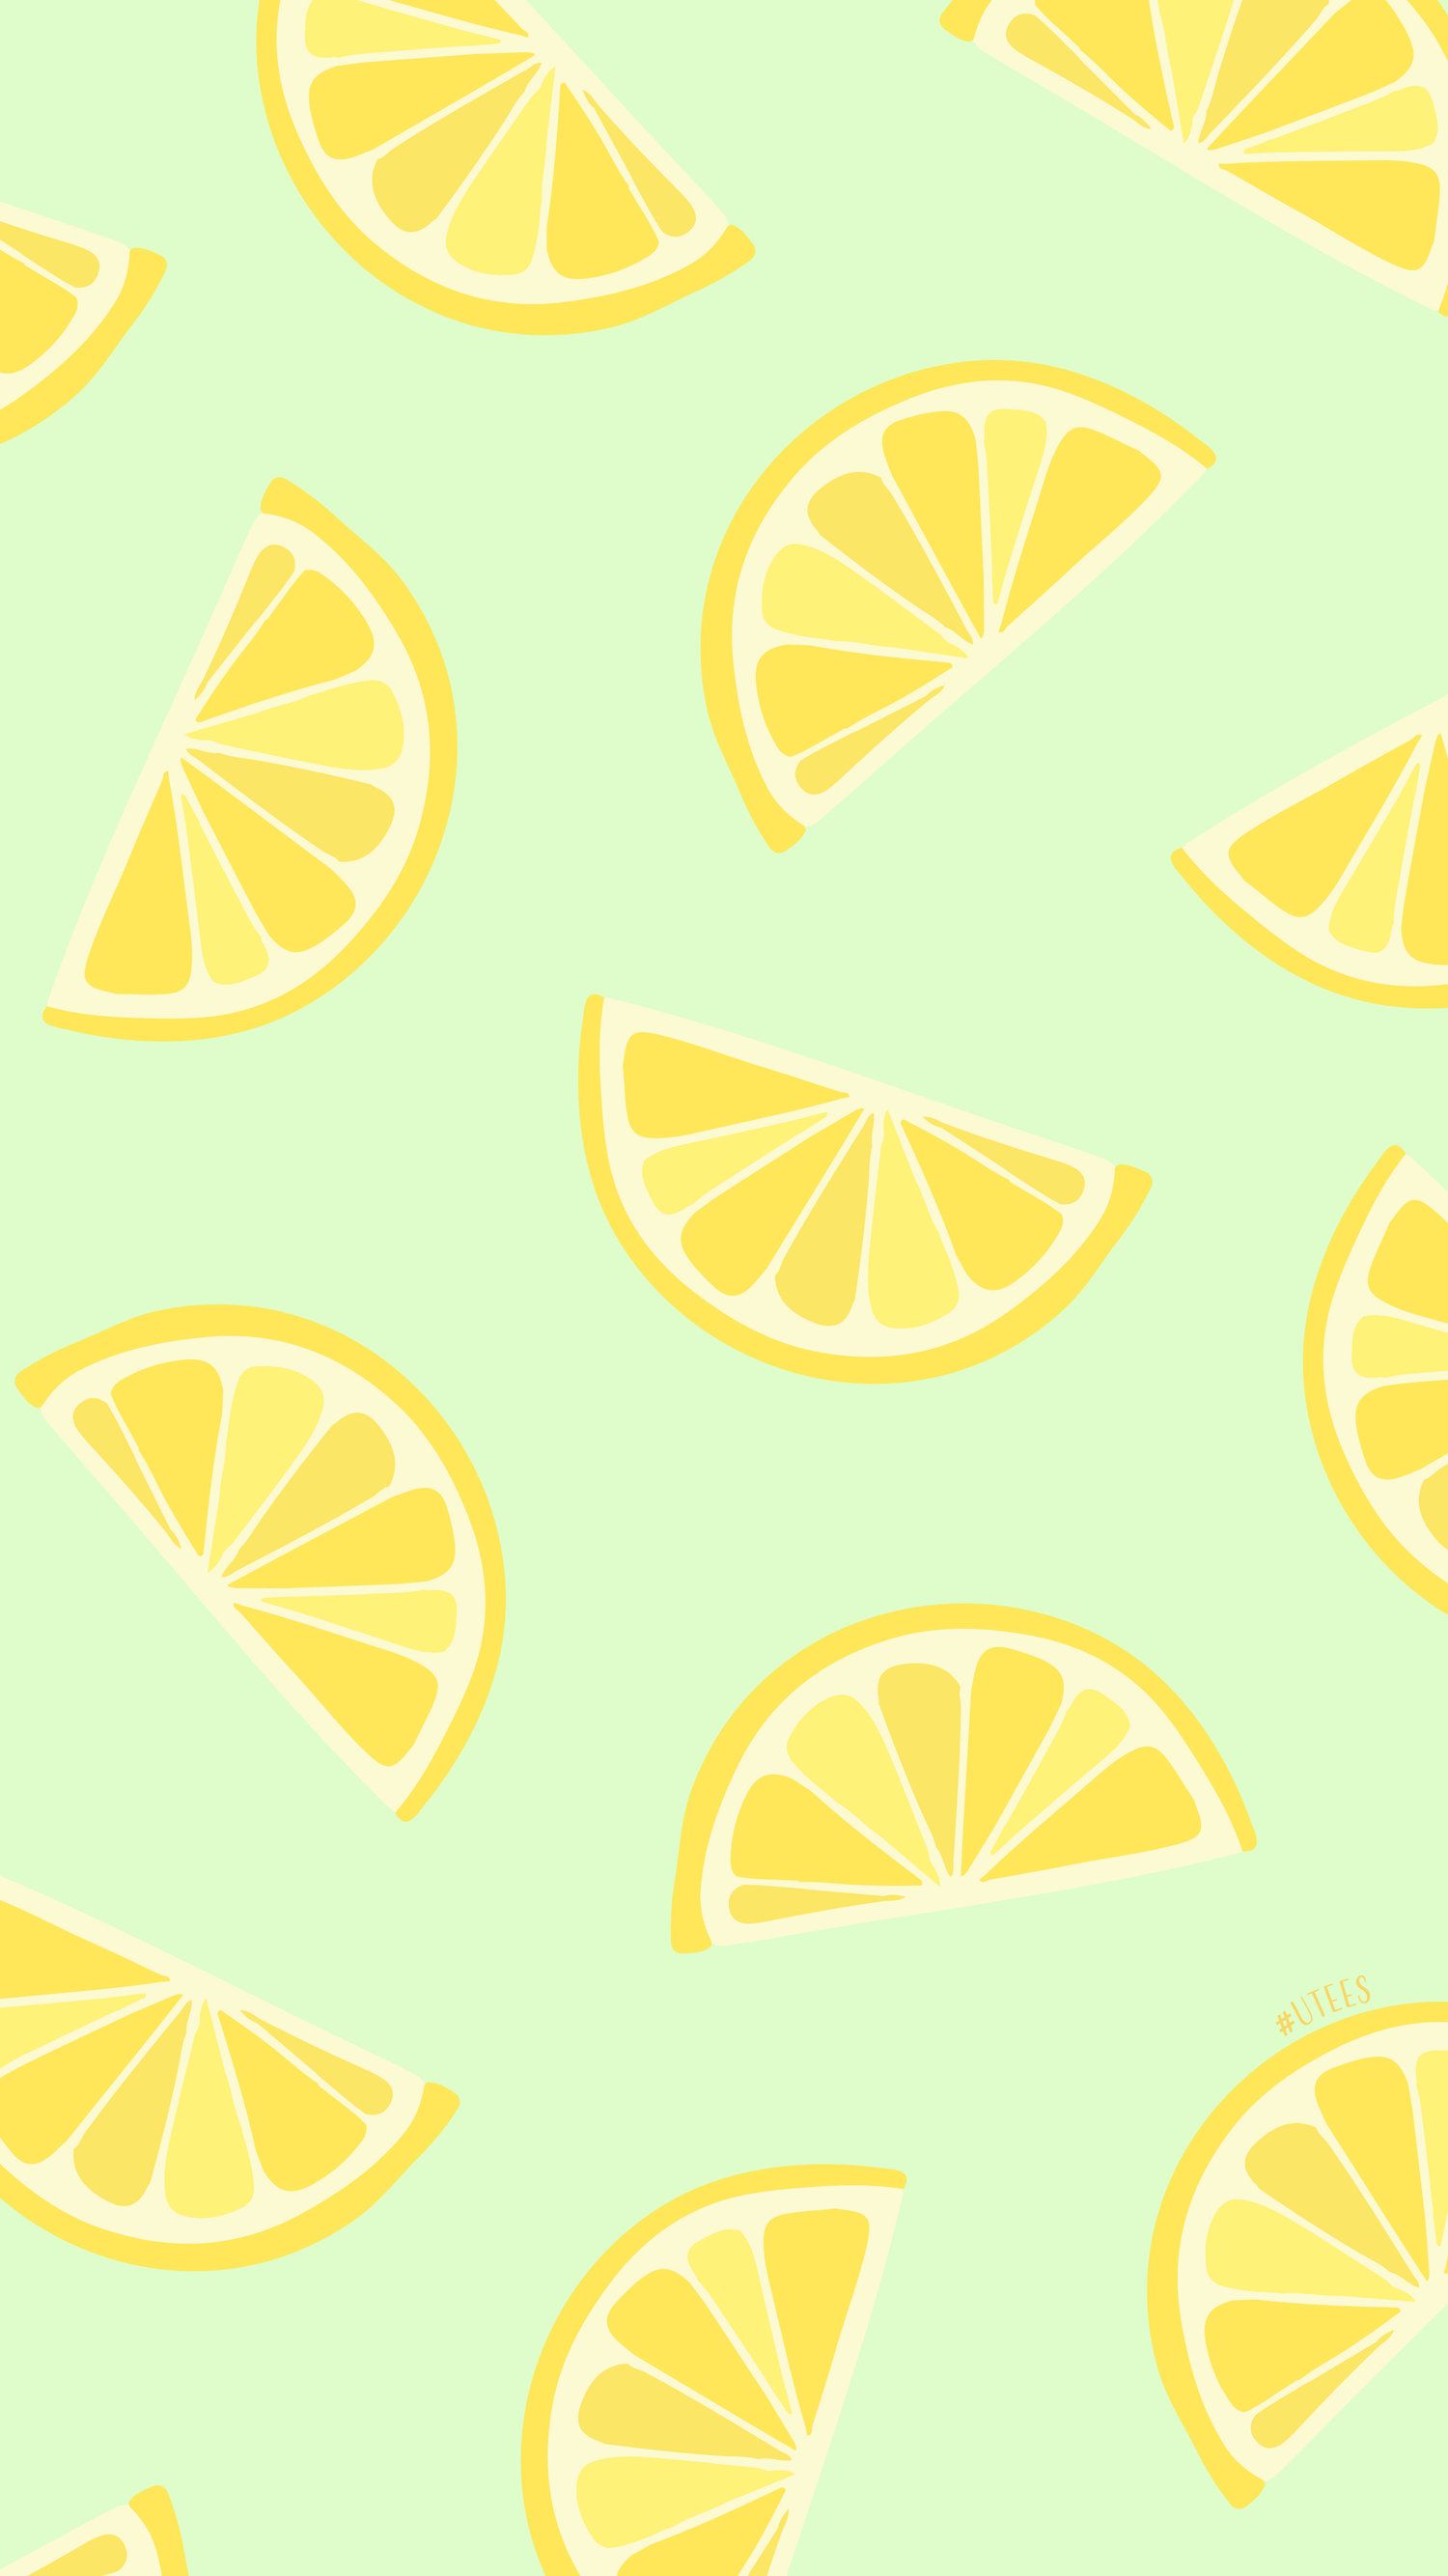 SG_Lemon3- Cute background for iphone, iPhone background, Wallpaper iphone summer